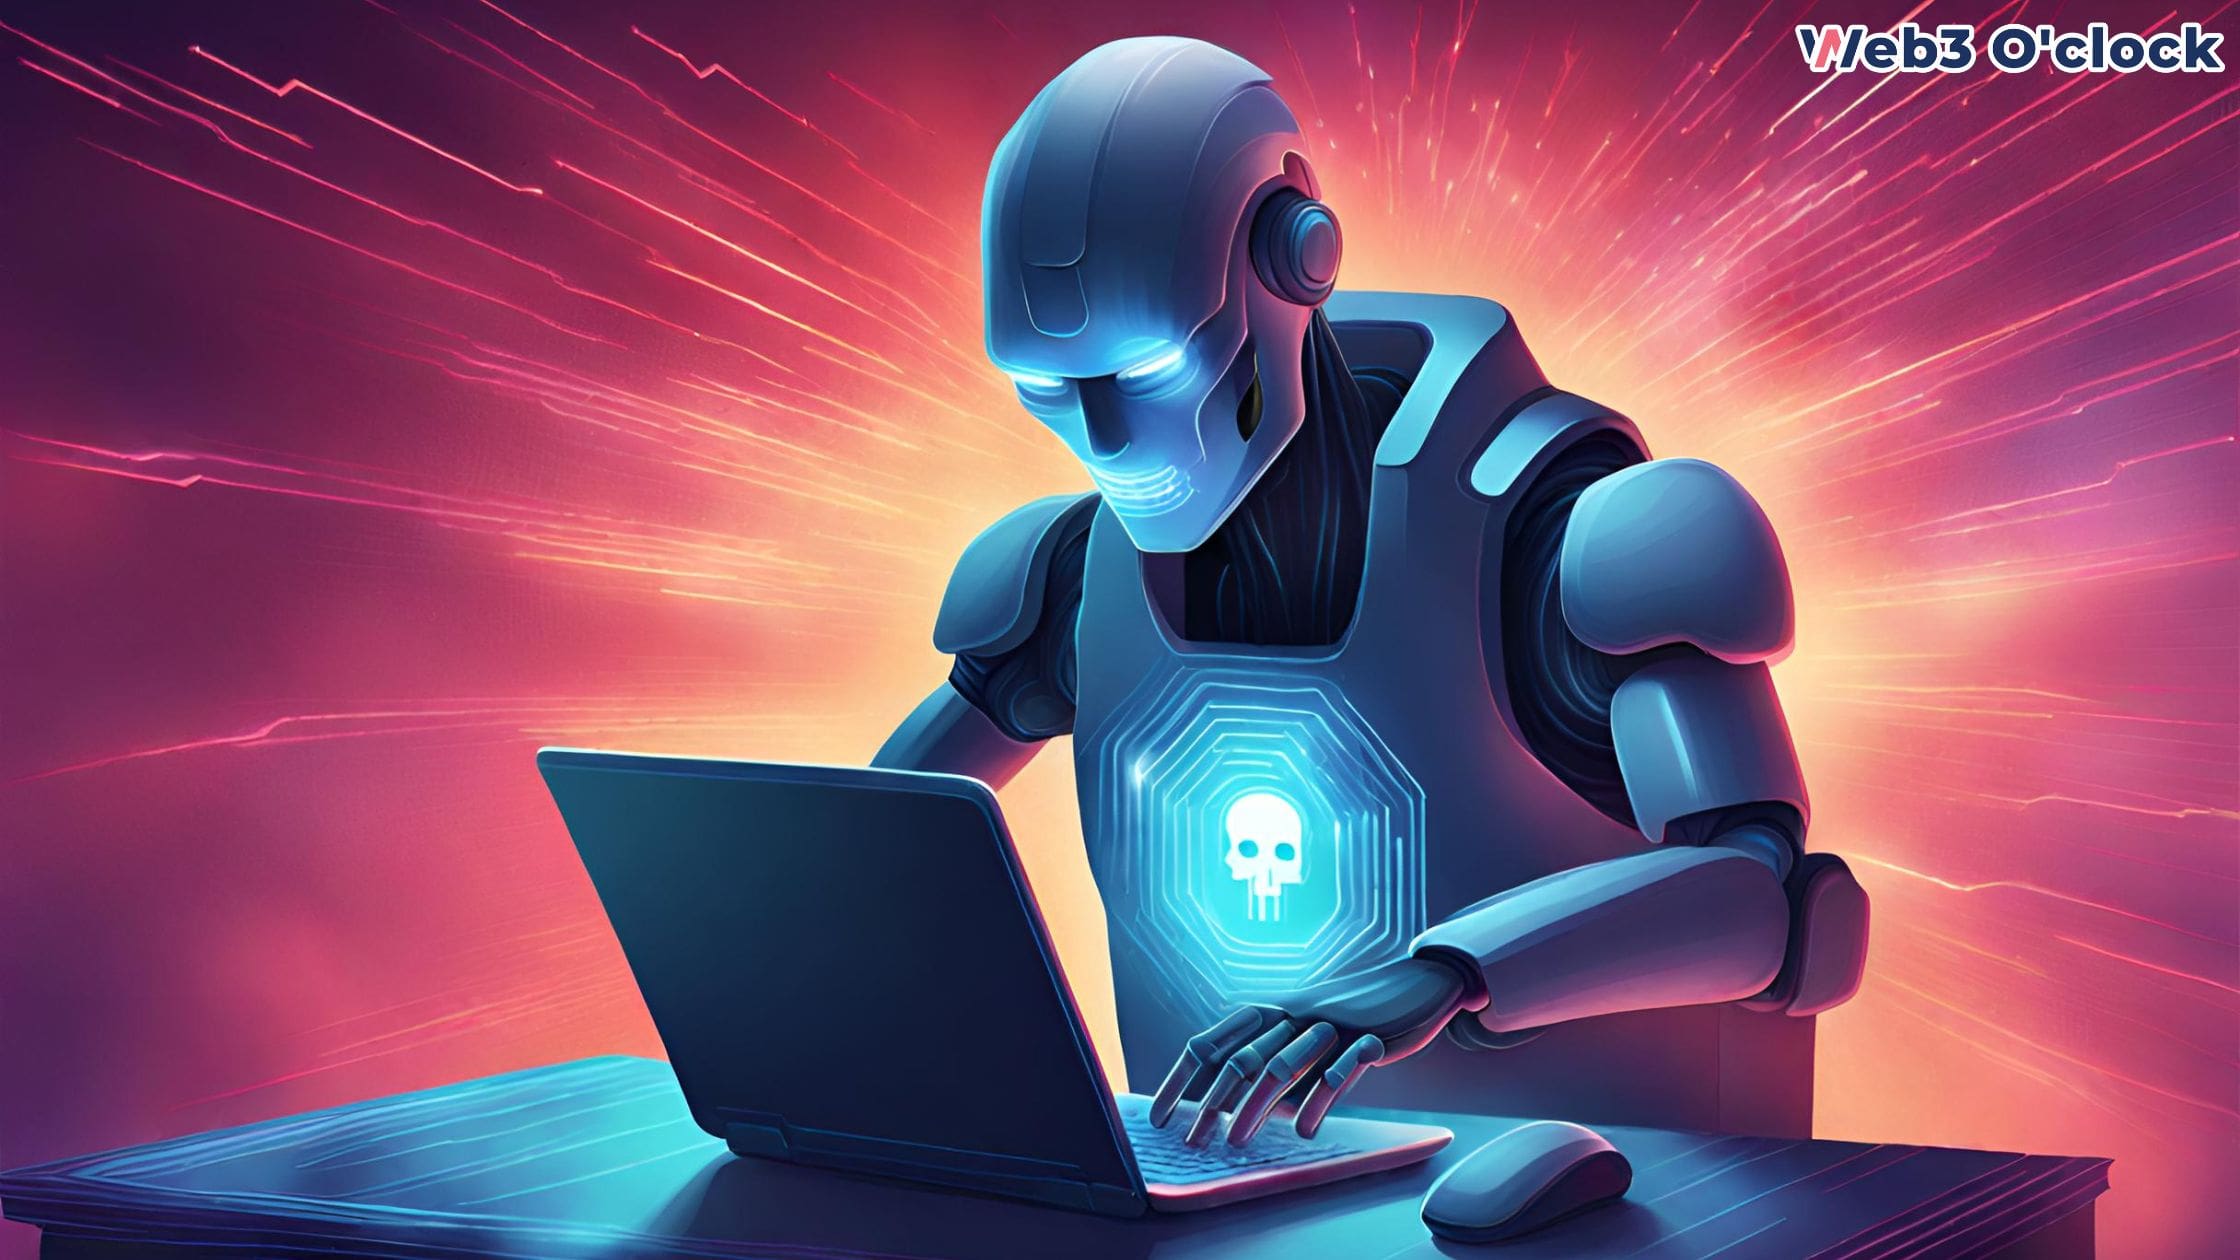  Artificial Intelligence Be Our Cyber Savior by web3oclock